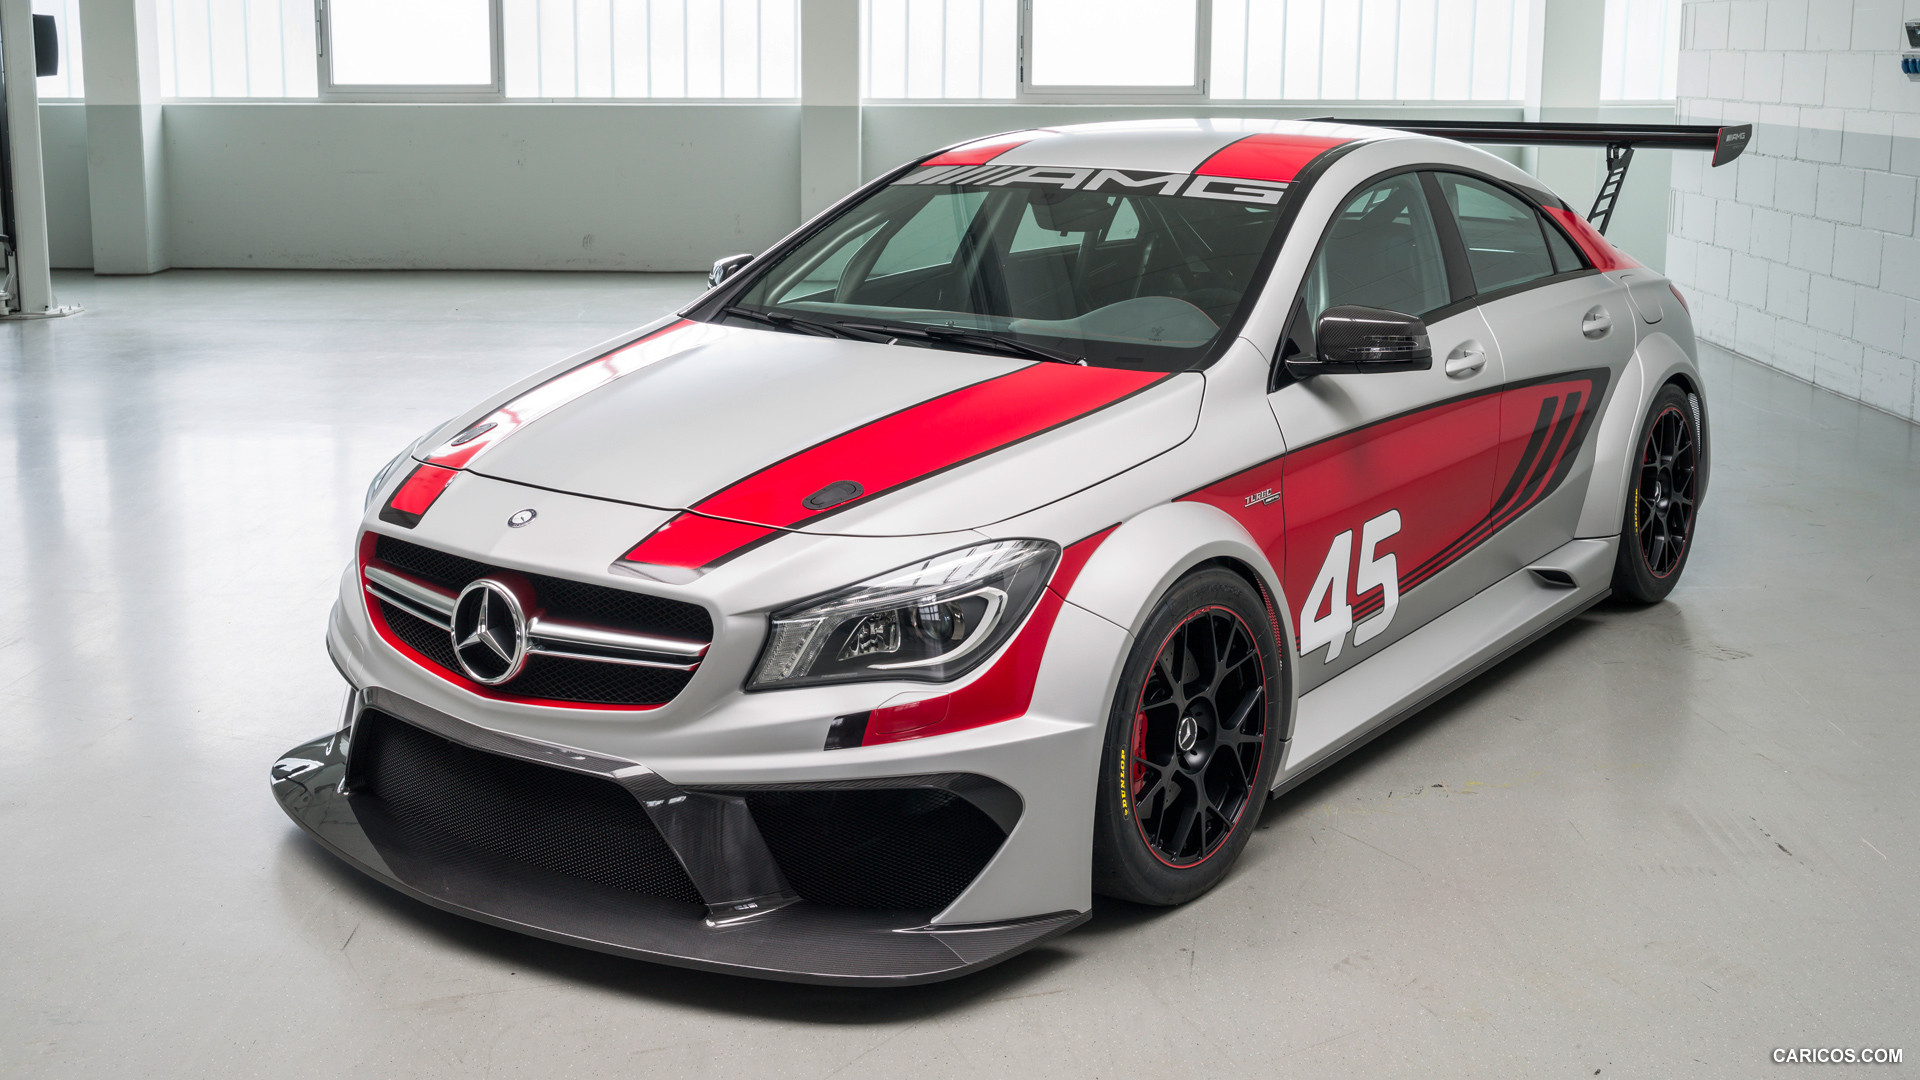 2013 Mercedes-Benz CLA 45 AMG Racing Series Concept  - Front, #14 of 26